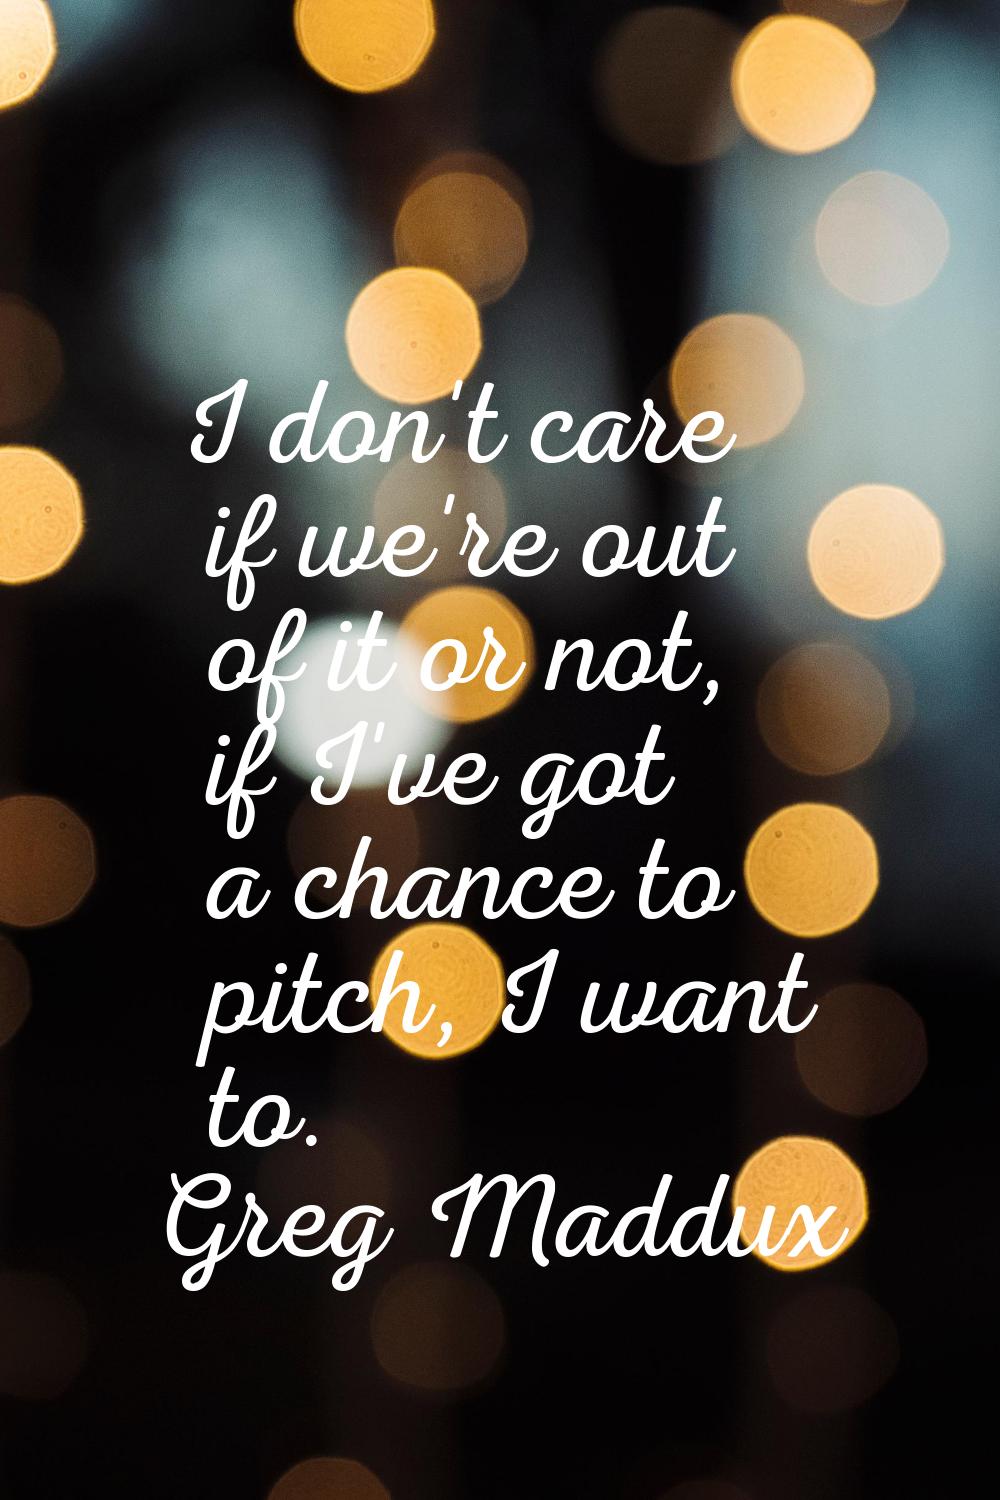 I don't care if we're out of it or not, if I've got a chance to pitch, I want to.